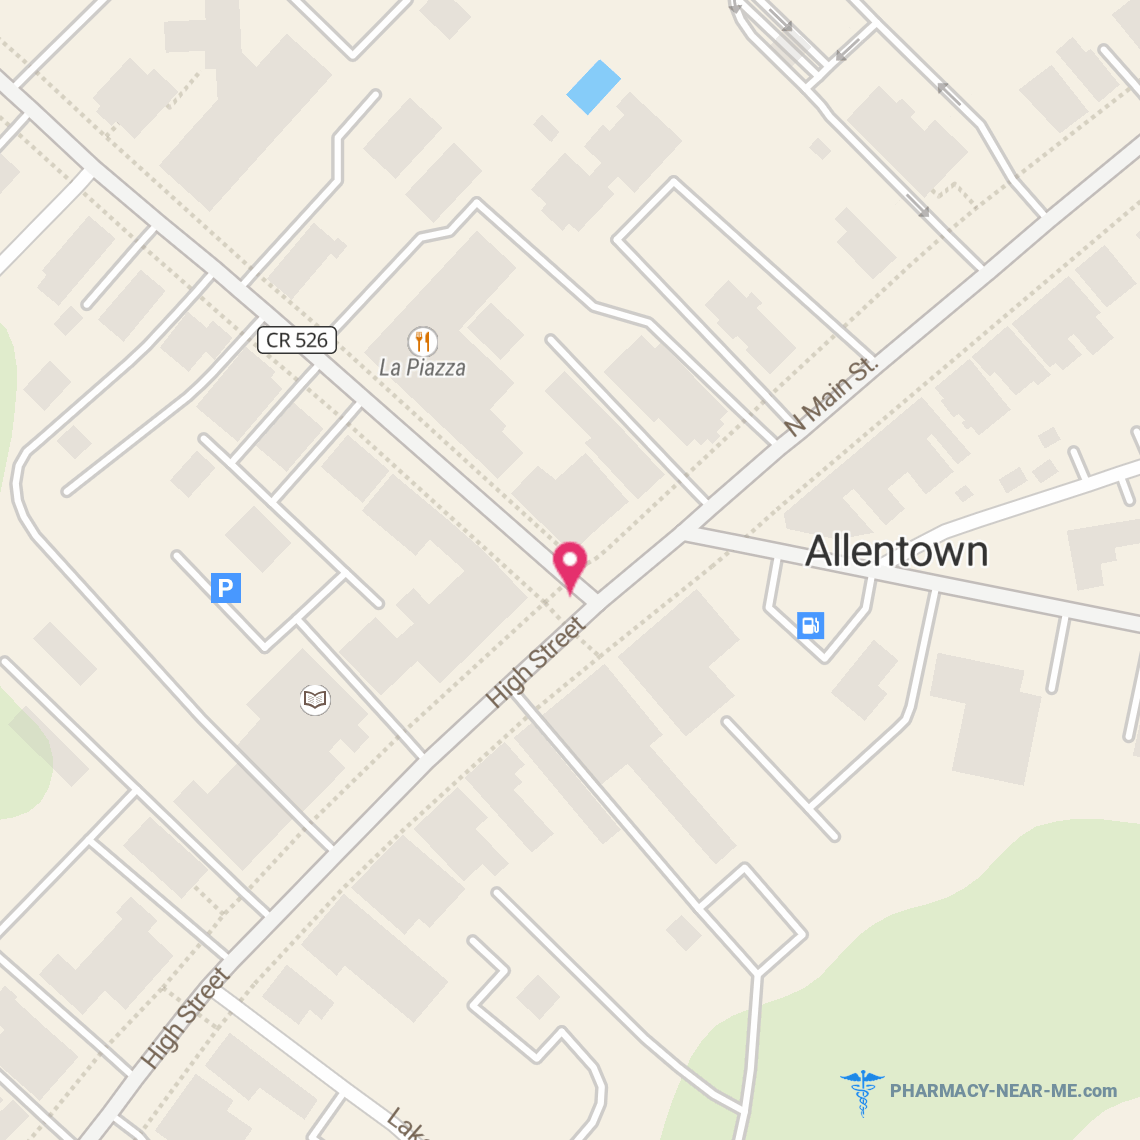 ALLENTOWN PHARMACY - Pharmacy Hours, Phone, Reviews & Information: 2 North Main Street, Allentown, New Jersey 08501, United States